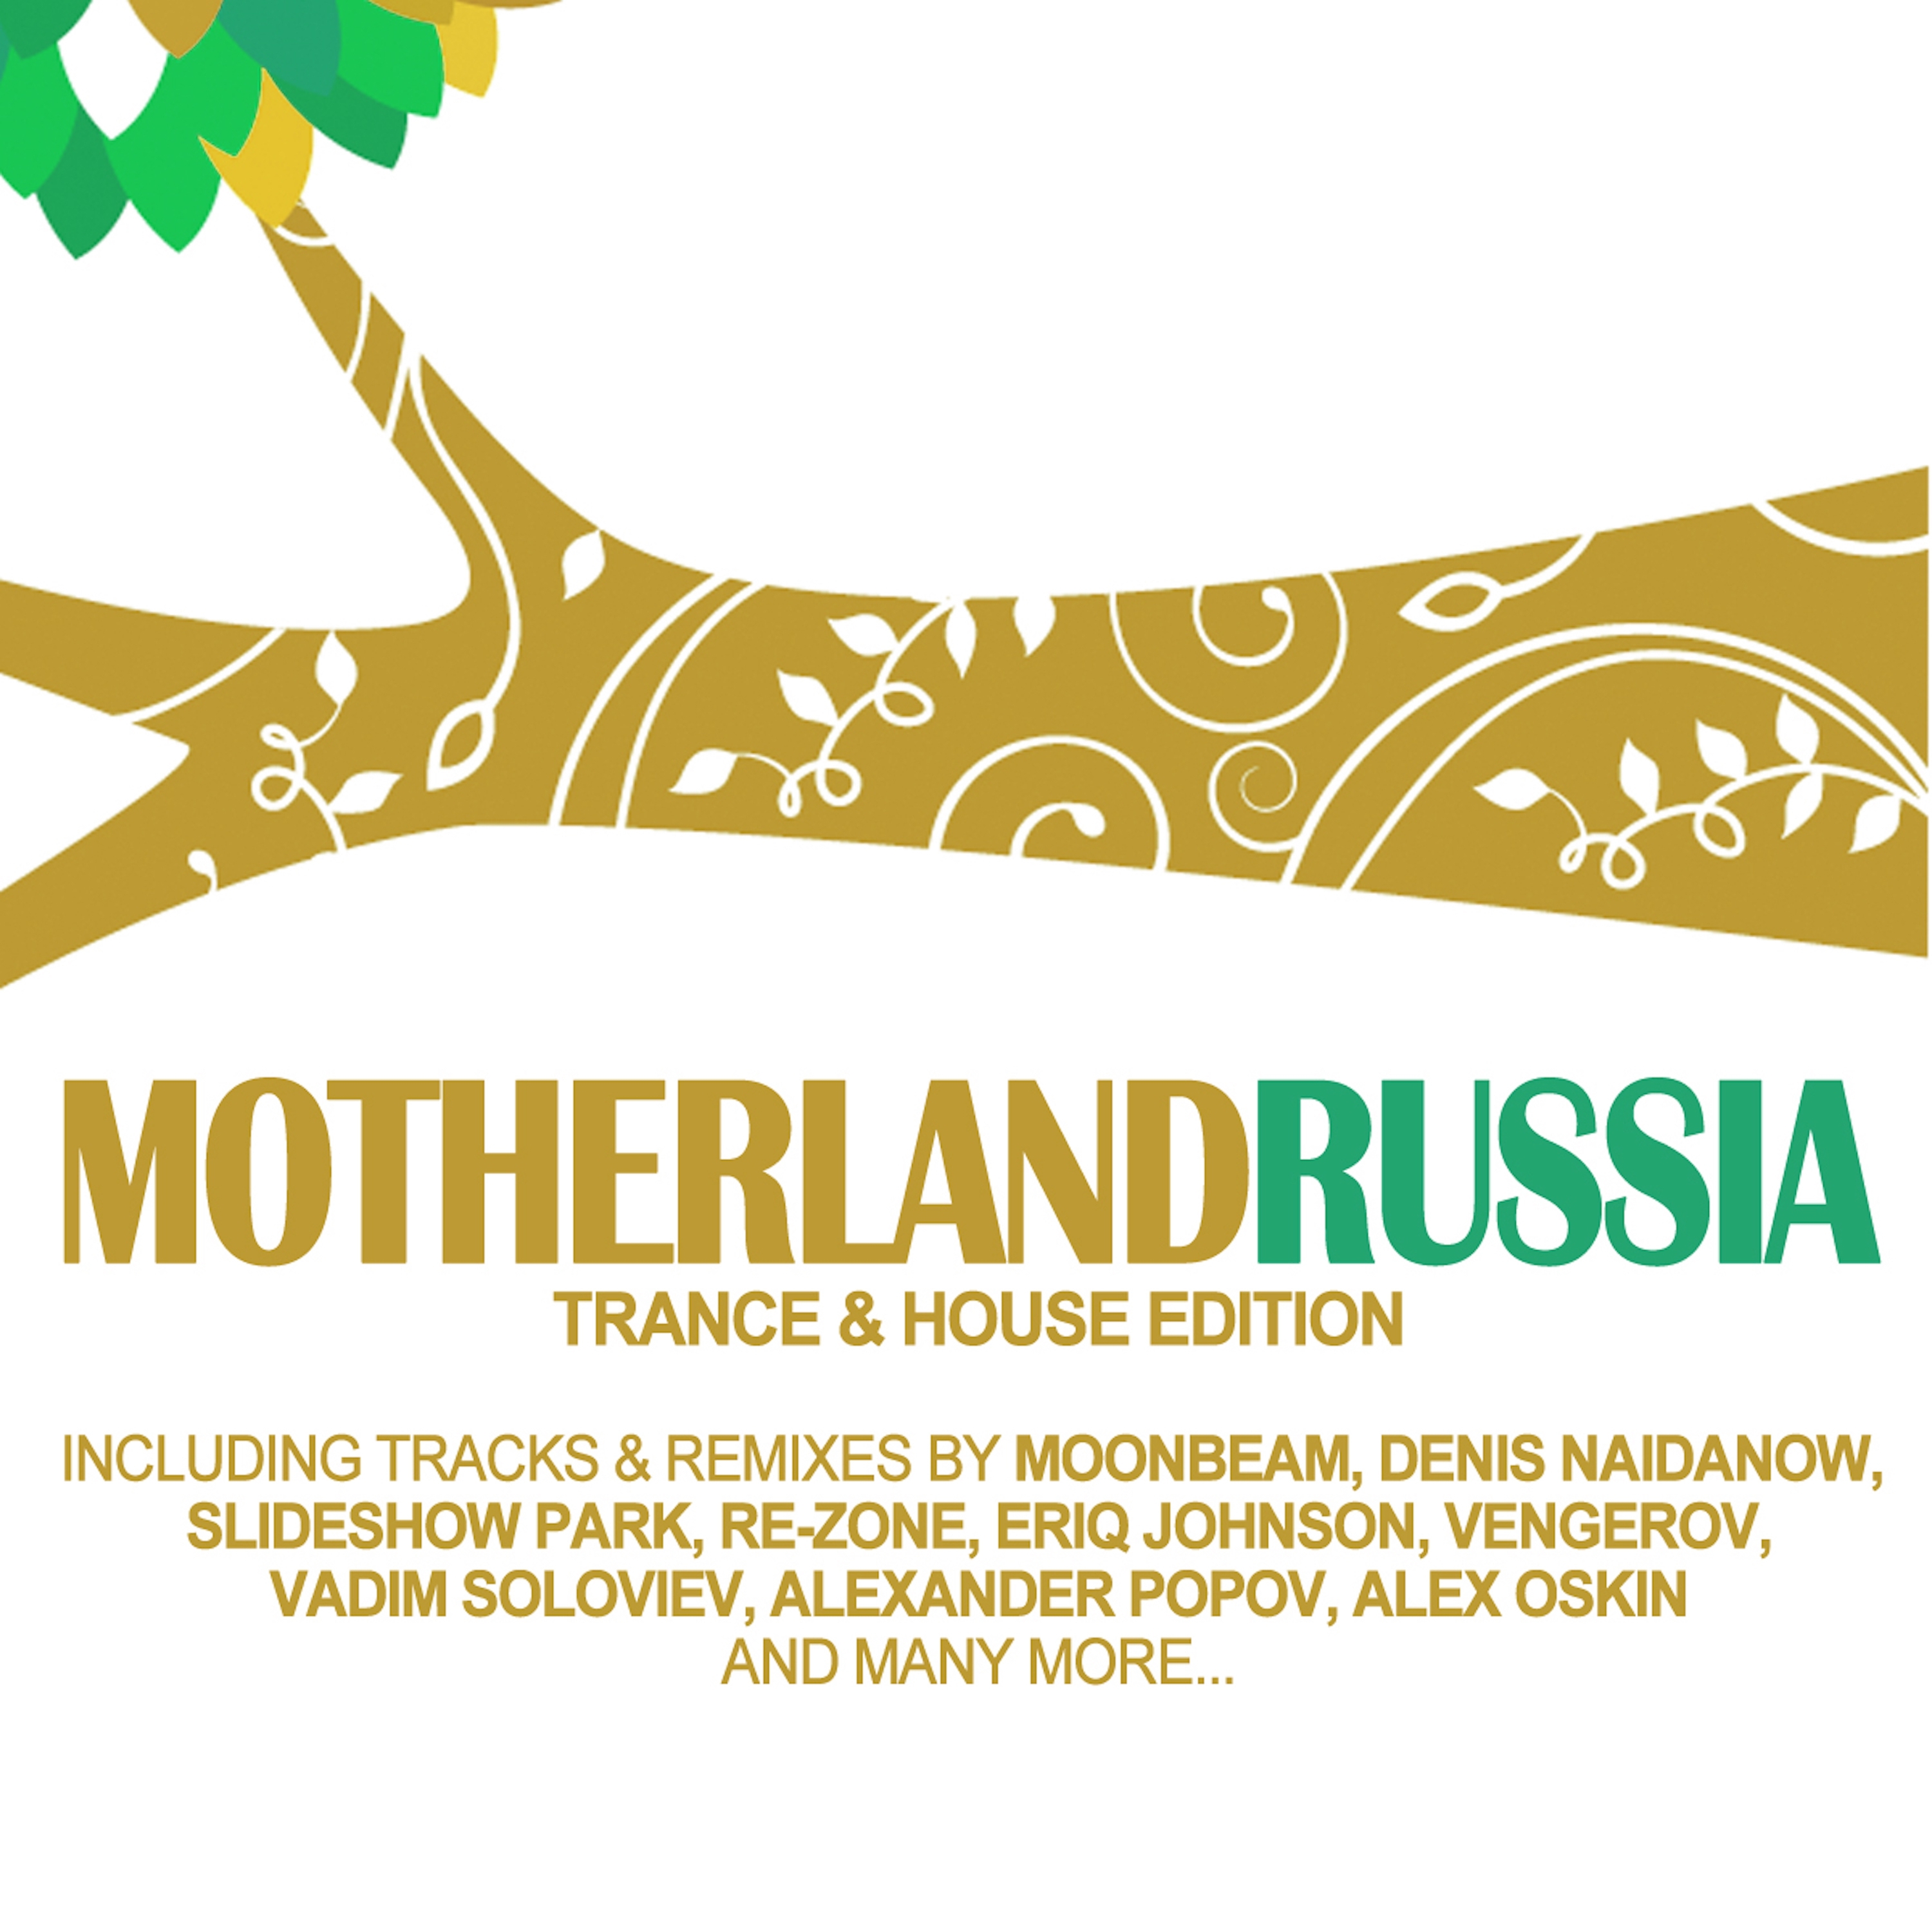 Motherland Russia - Trance & House Edition